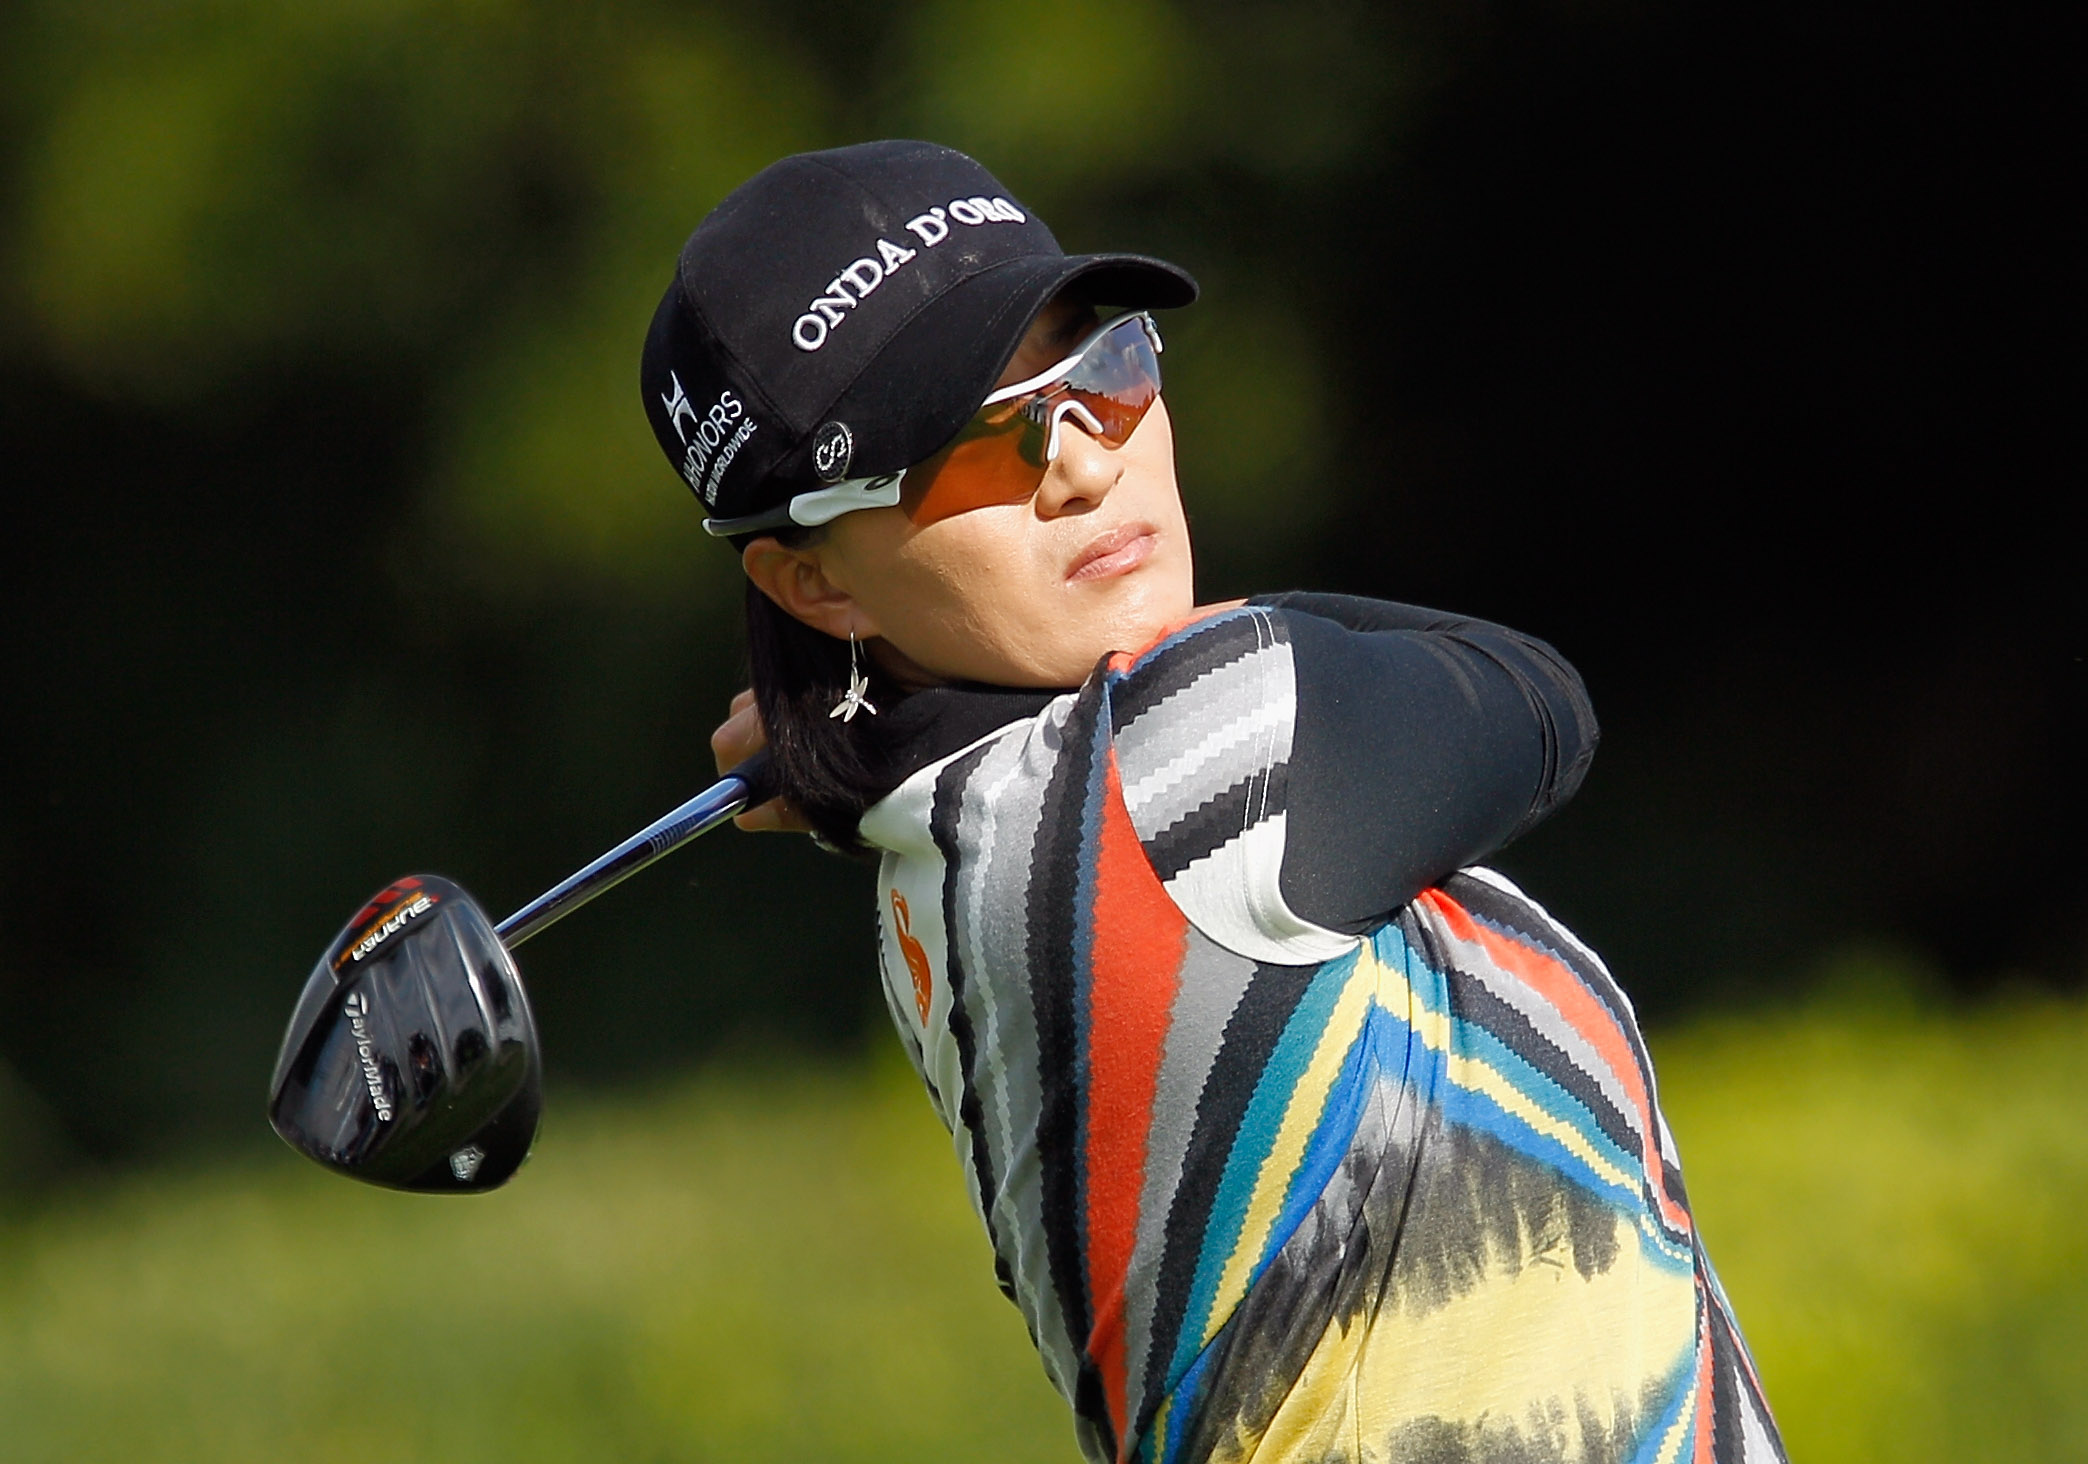 ORLANDO, FL - DECEMBER 05:  Se Ri Pak of South Korea watches her tee shot on the third hole during the final round of the LPGA Tour Championship at the Grand Cypress Resort on December 5, 2010 in Orlando, Florida.  (Photo by Scott Halleran/Getty Images)